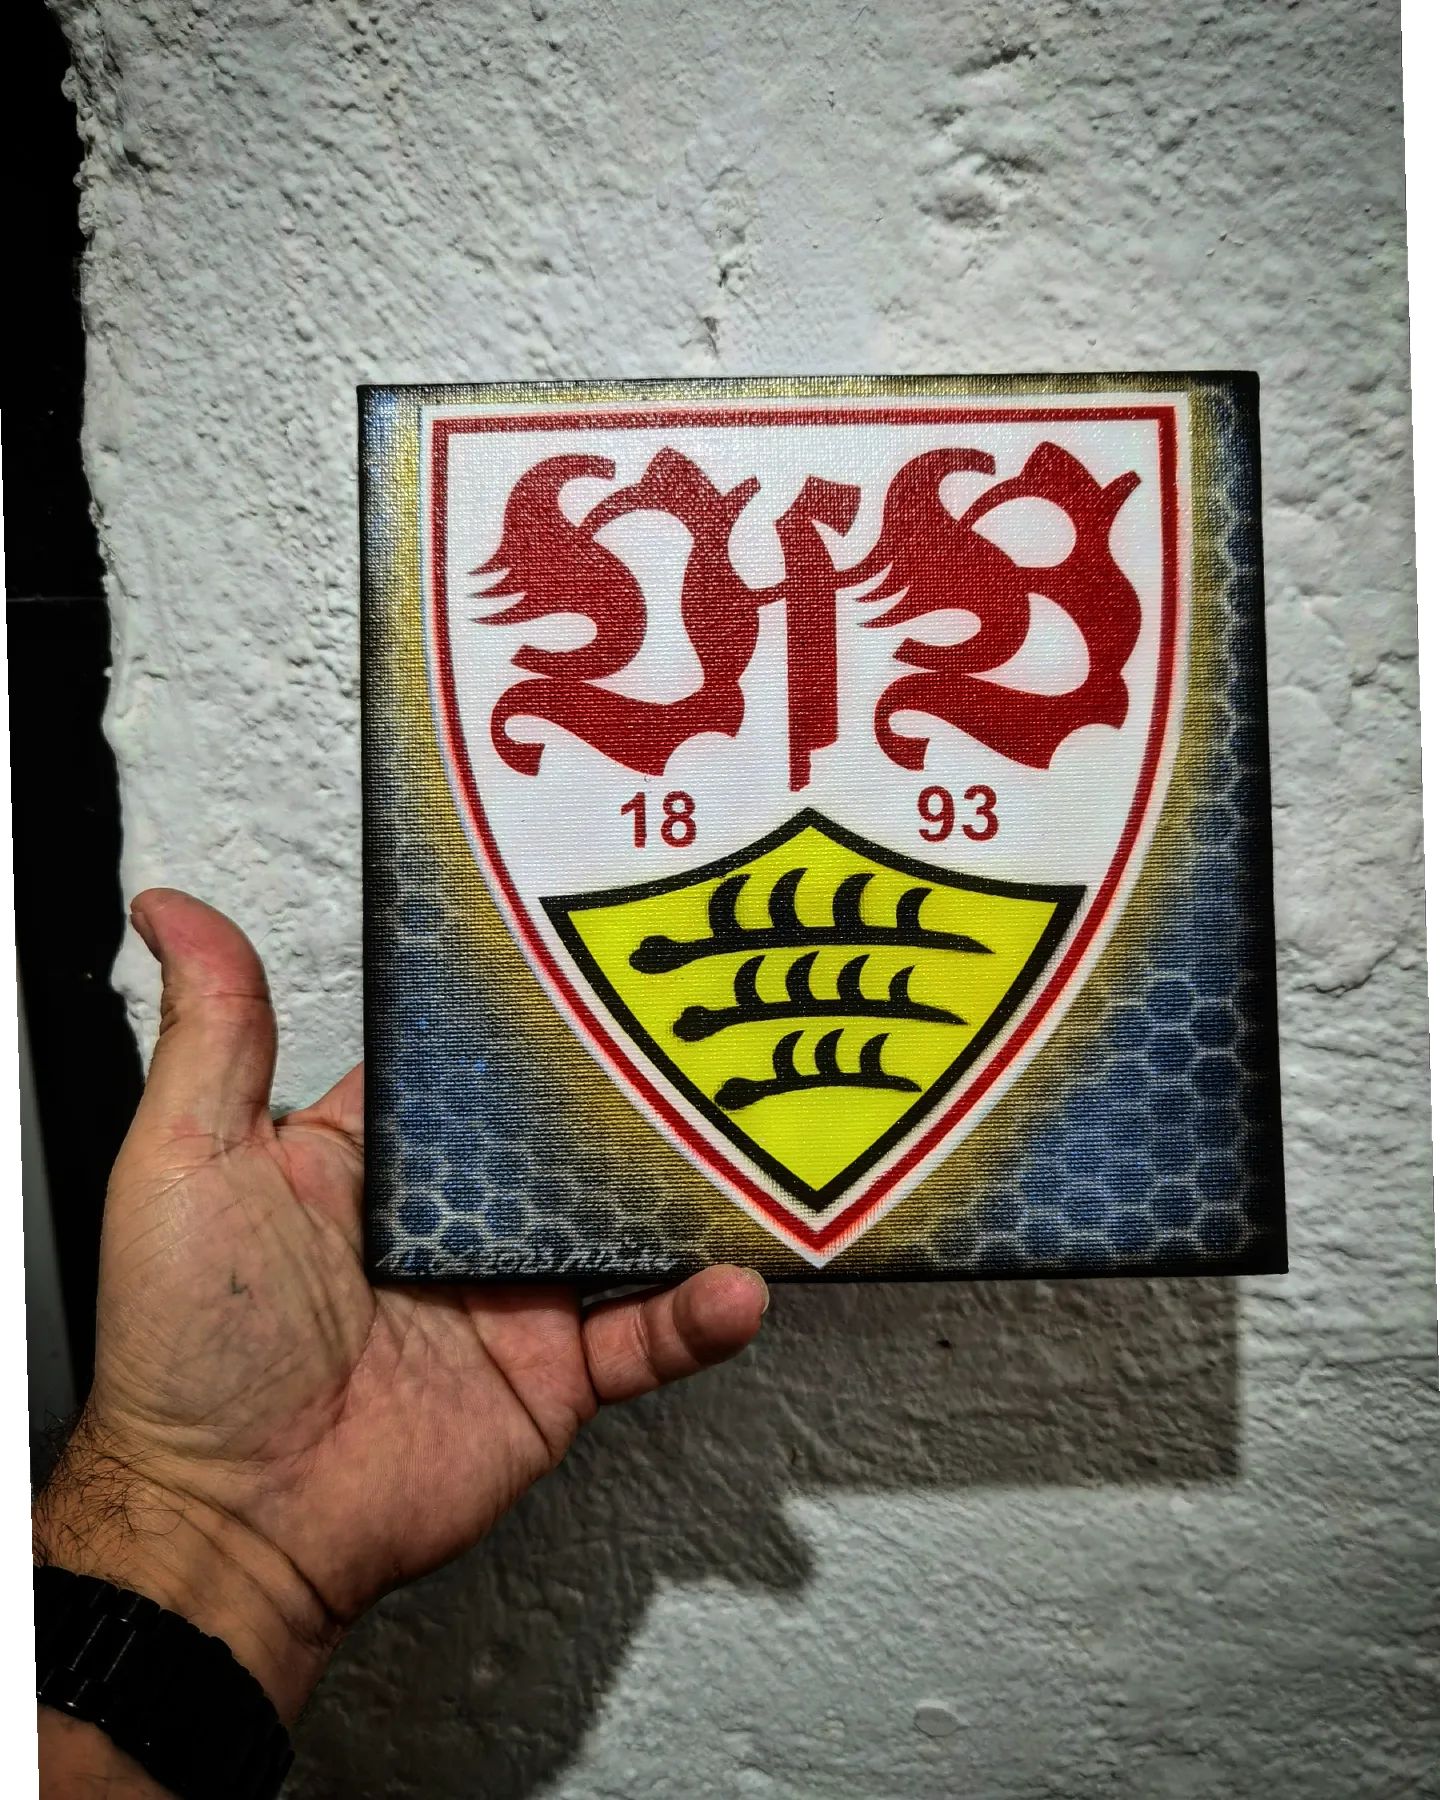 And the third one. Another try on this.  #vfbstuttgart #airbrush #airbrushart #fanart #kunst #luftpinselkunst #art #createx #createxwickedcolors #canvas #justforfun